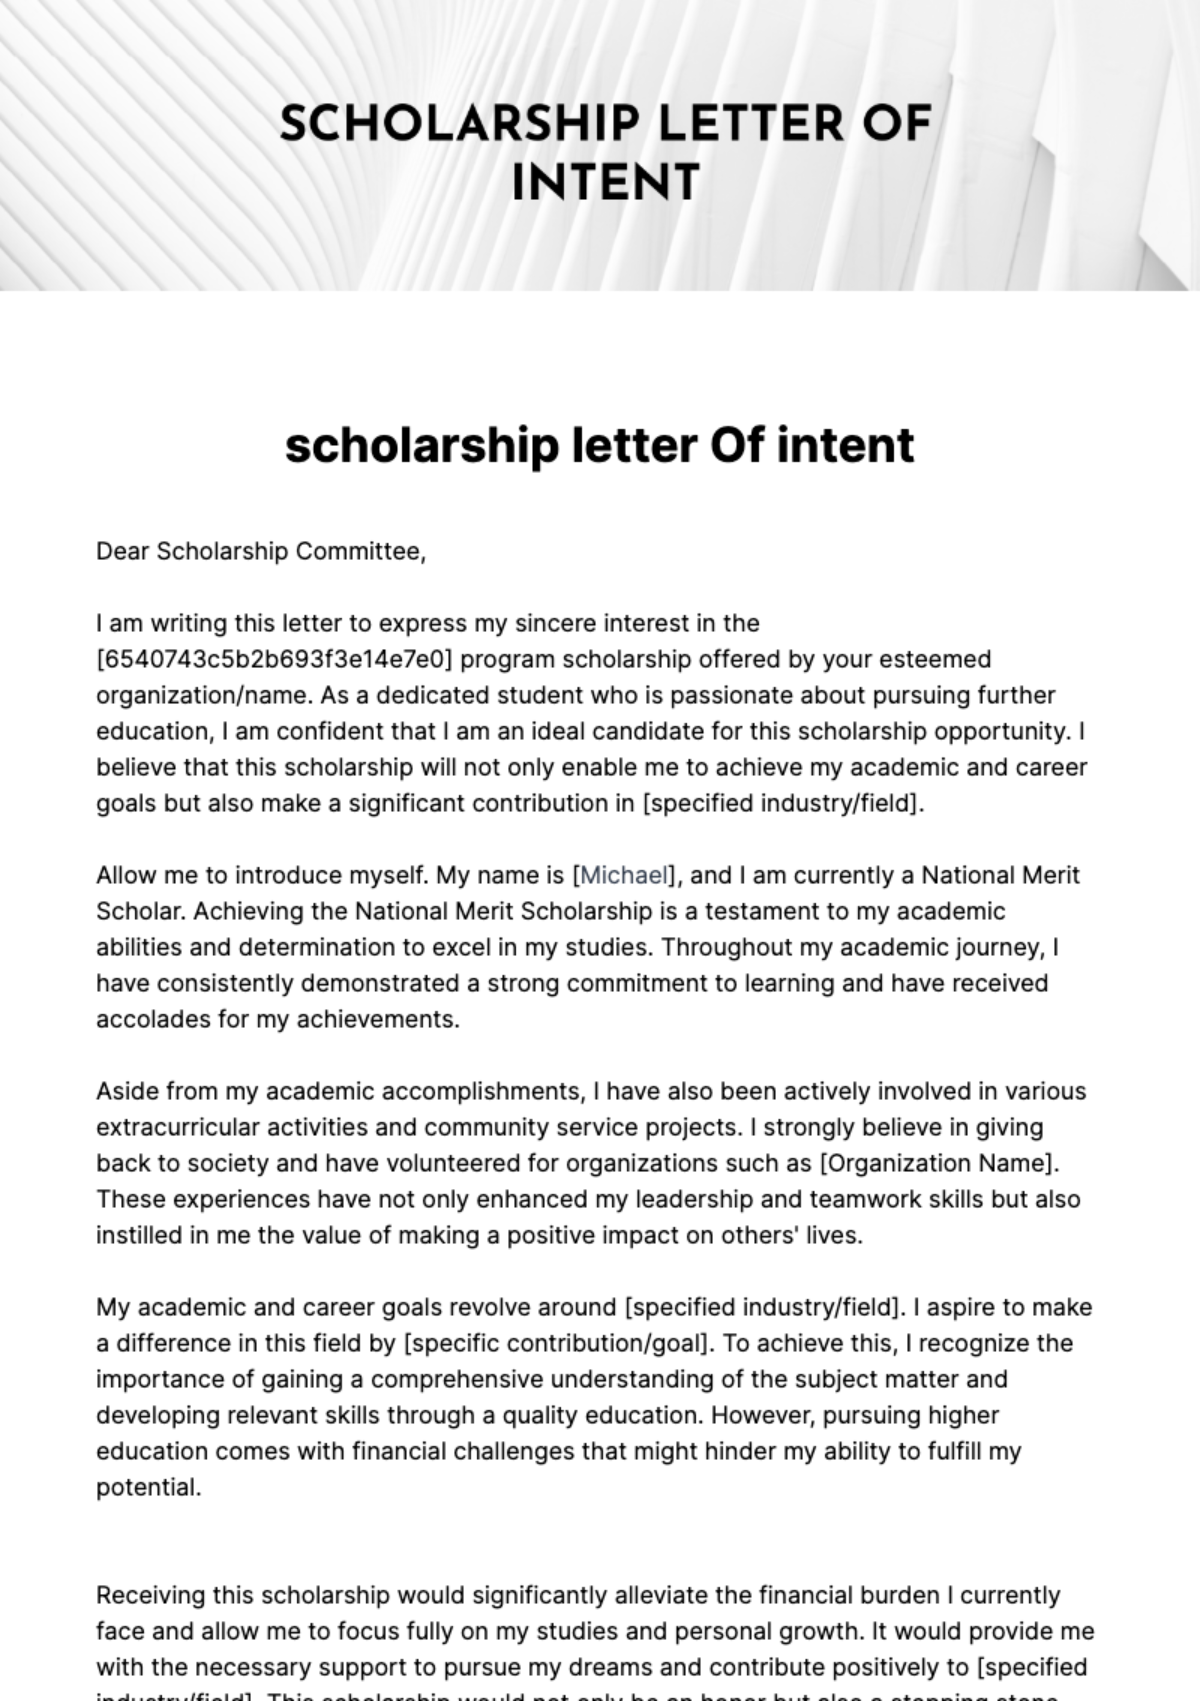 Free scholarship letter of intent Template